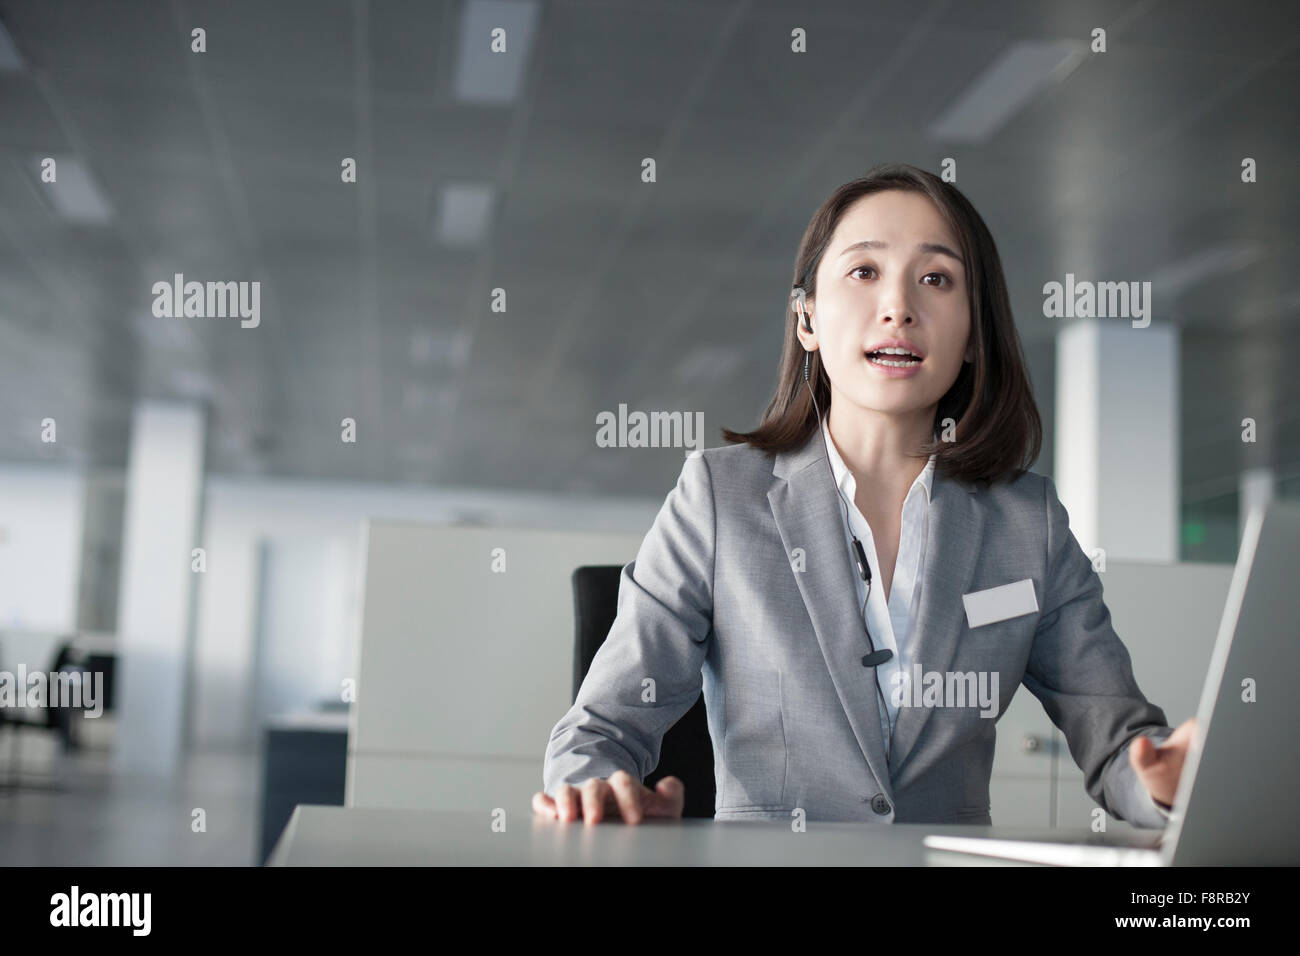 Young businesswoman Stock Photo